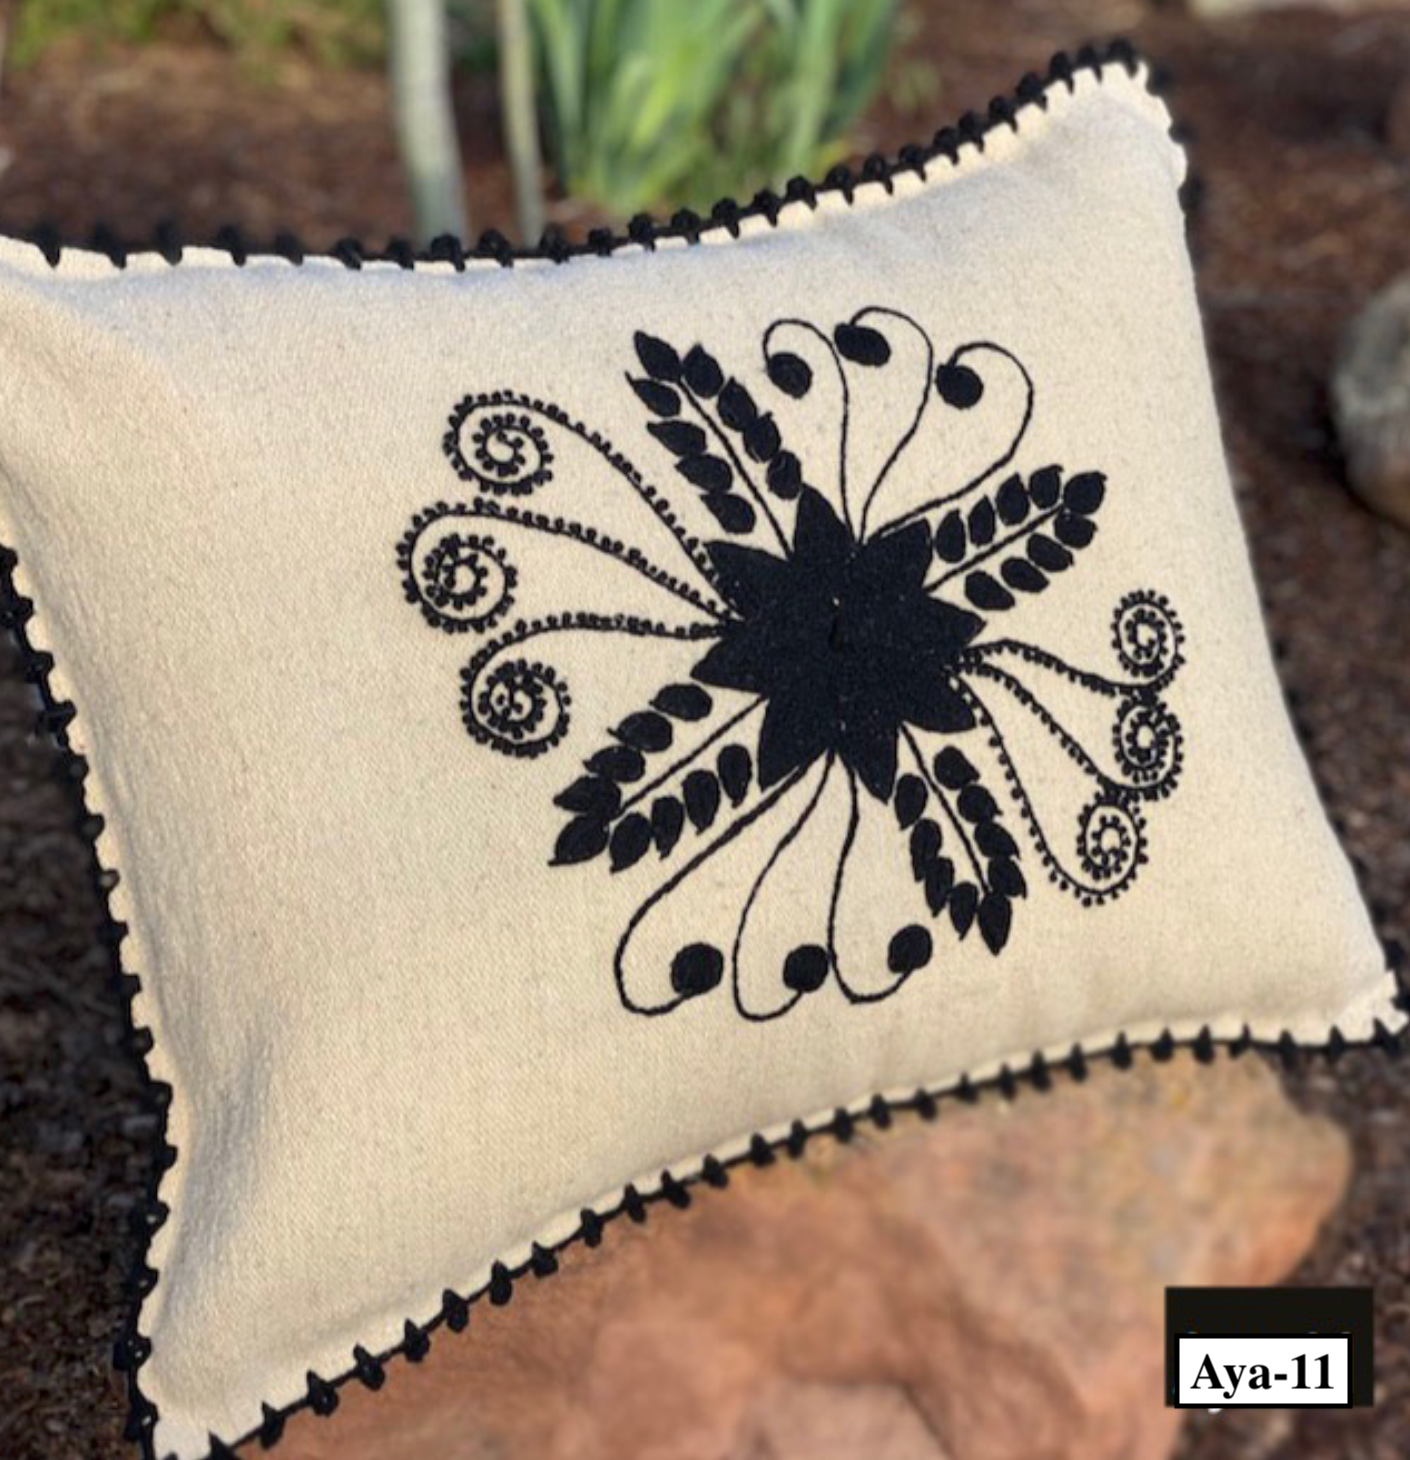 Embroidered wool pillows from Ayacucho, Peru